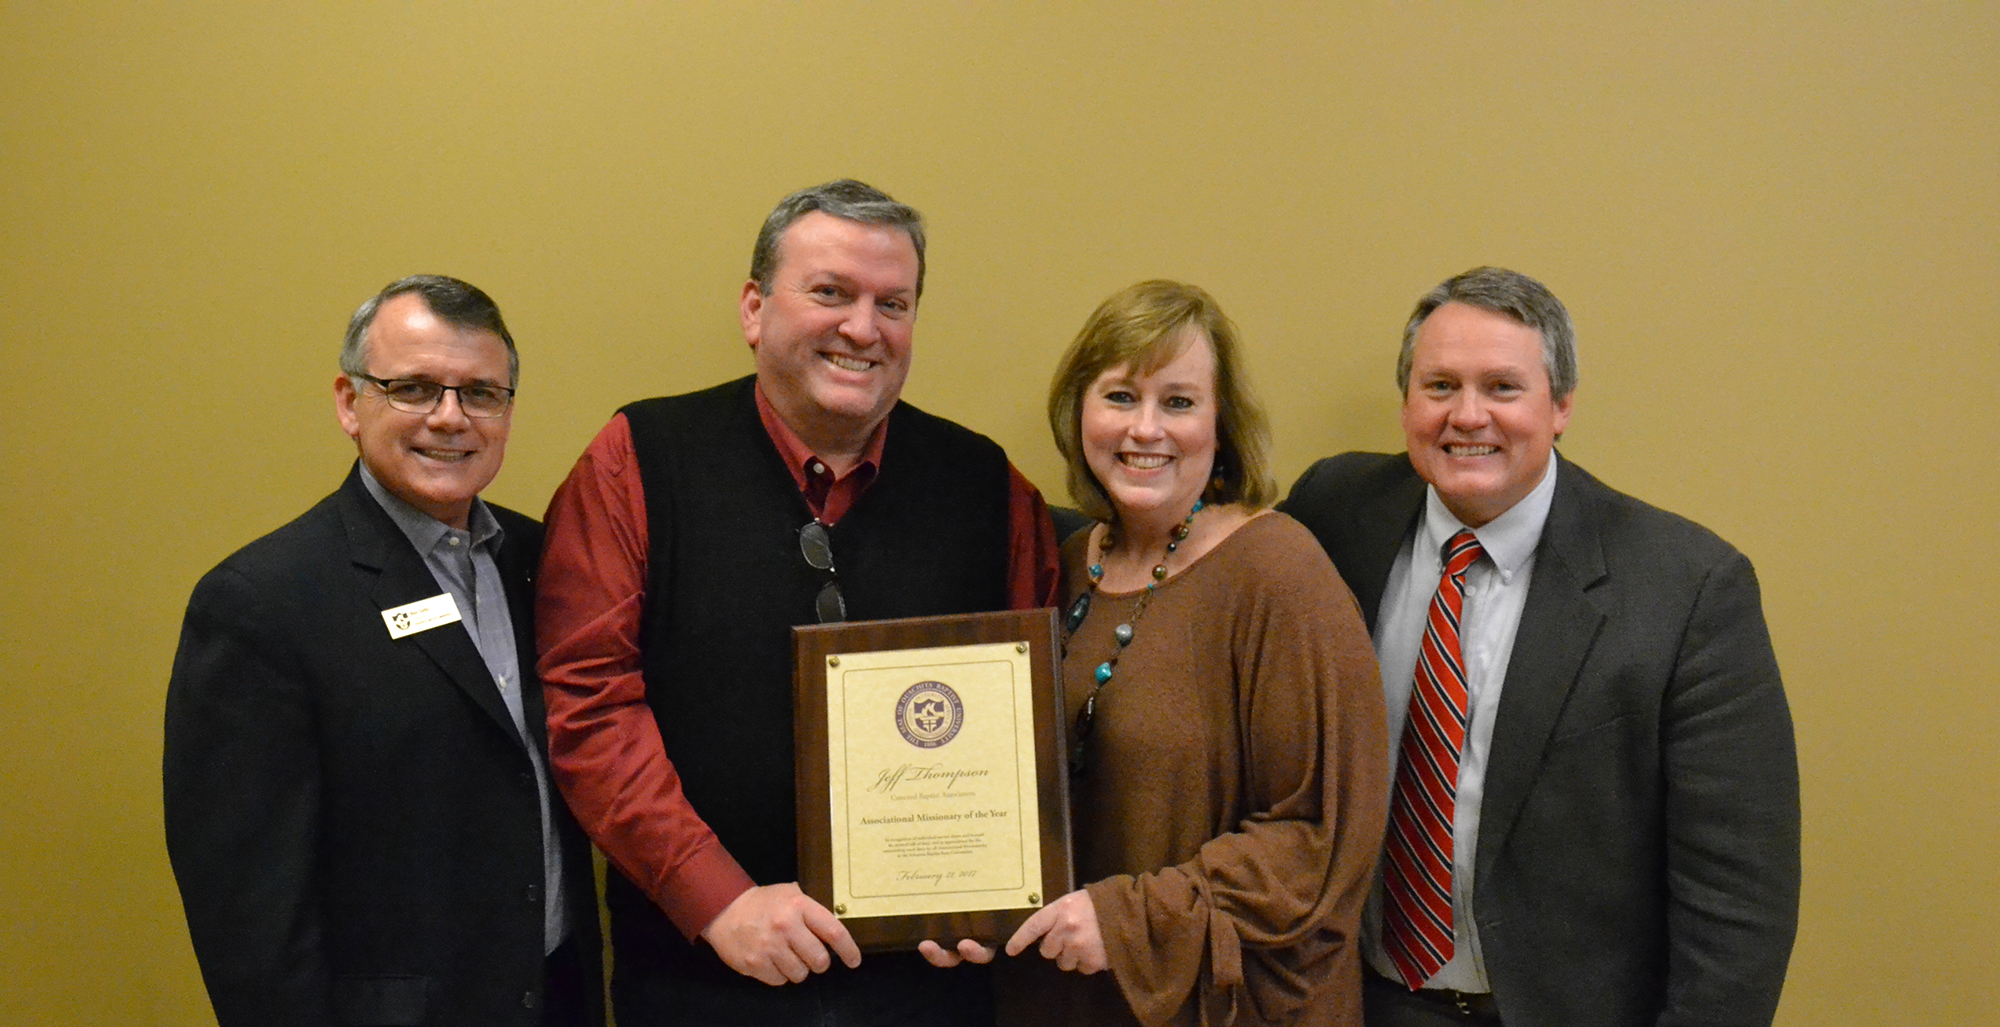 Dr. Jeff Thompson (second from left), associational missionary for Concord Baptist Association, was named the 2017 Associational Missionary of the Year. Dr. Ben Sells (left), president of Ouachita Baptist University, presented the award to Thompson. Also pictured are Thompson’s wife, Susie, and Dr. J.D. “Sonny” Tucker, executive director of the Arkansas Baptist State Convention.